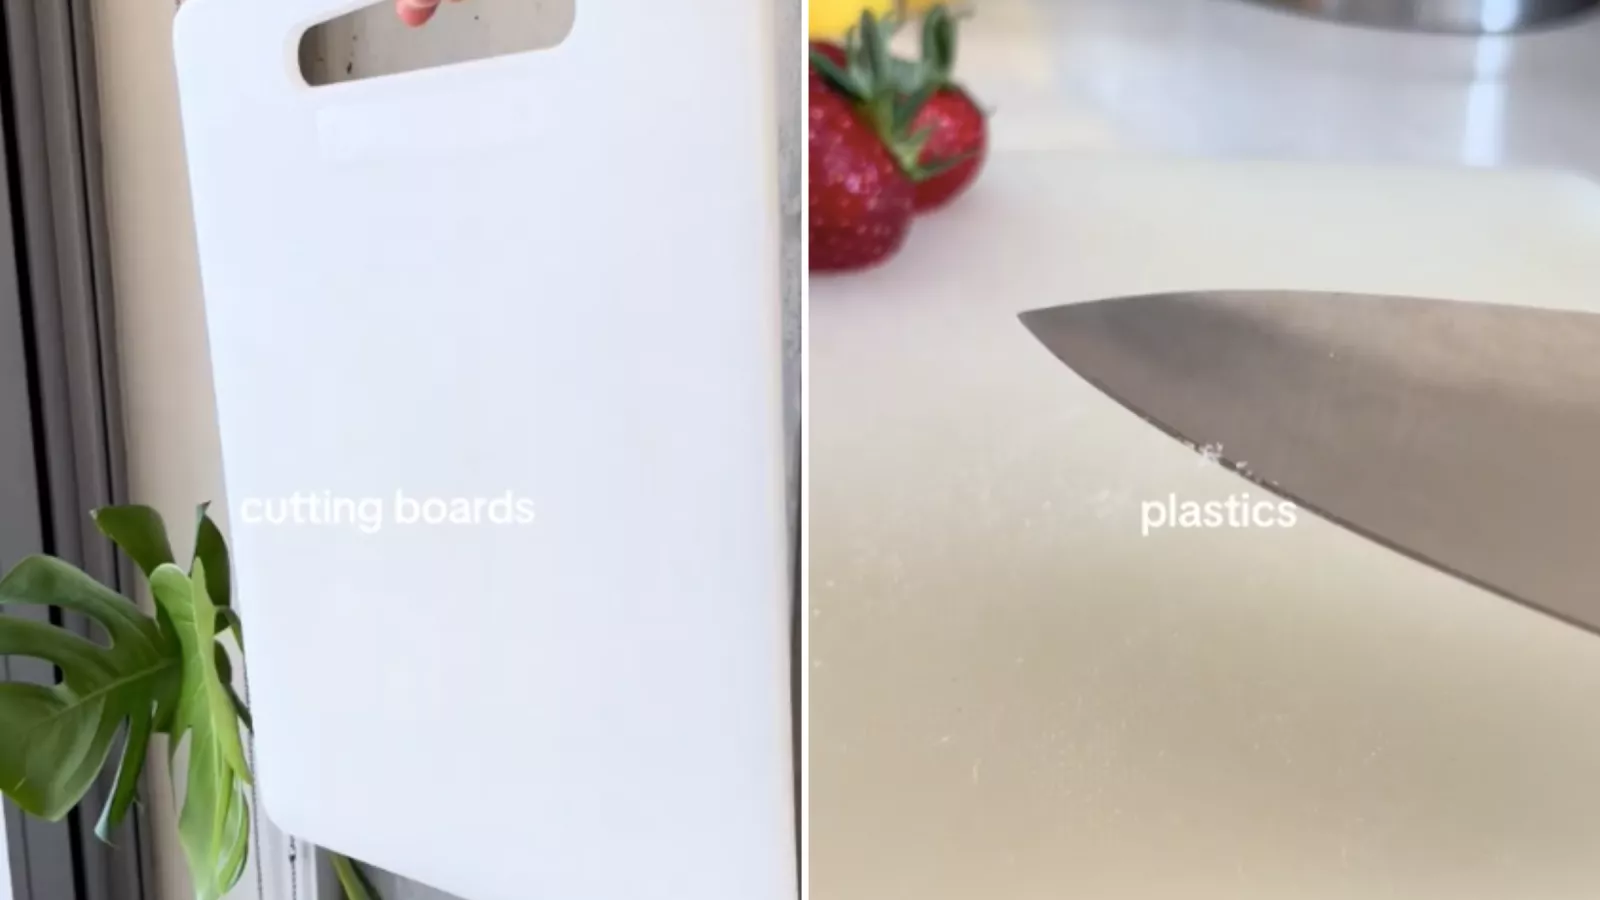 Are Plastic Cutting Boards Safe? An Expert Weighs In